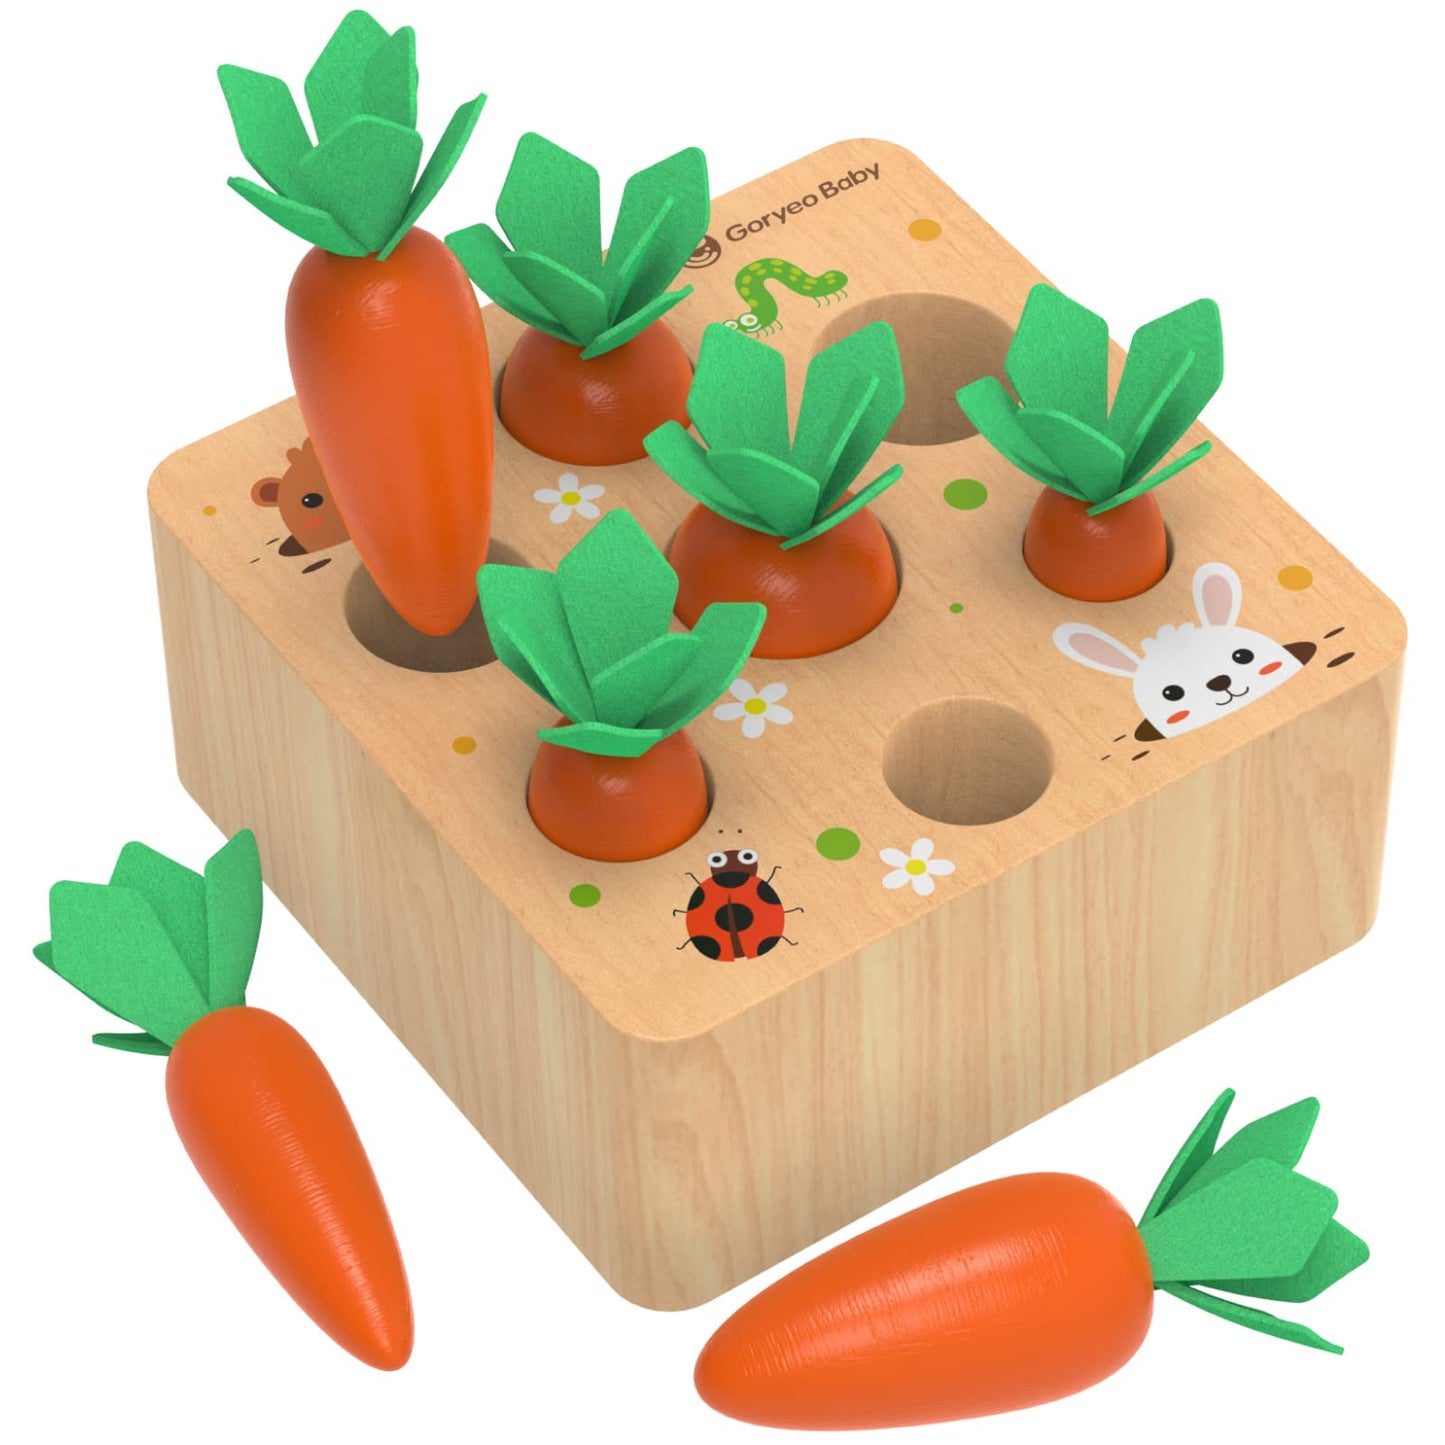 KMTJT Montessori Toys for 1 2 3 Year Old Toddlers, Macron Carrot Harvest Game Wooden Toys for Baby Boys and Girls, Educational Learning Shape Sorting Matching Gifts for Babies 1-3